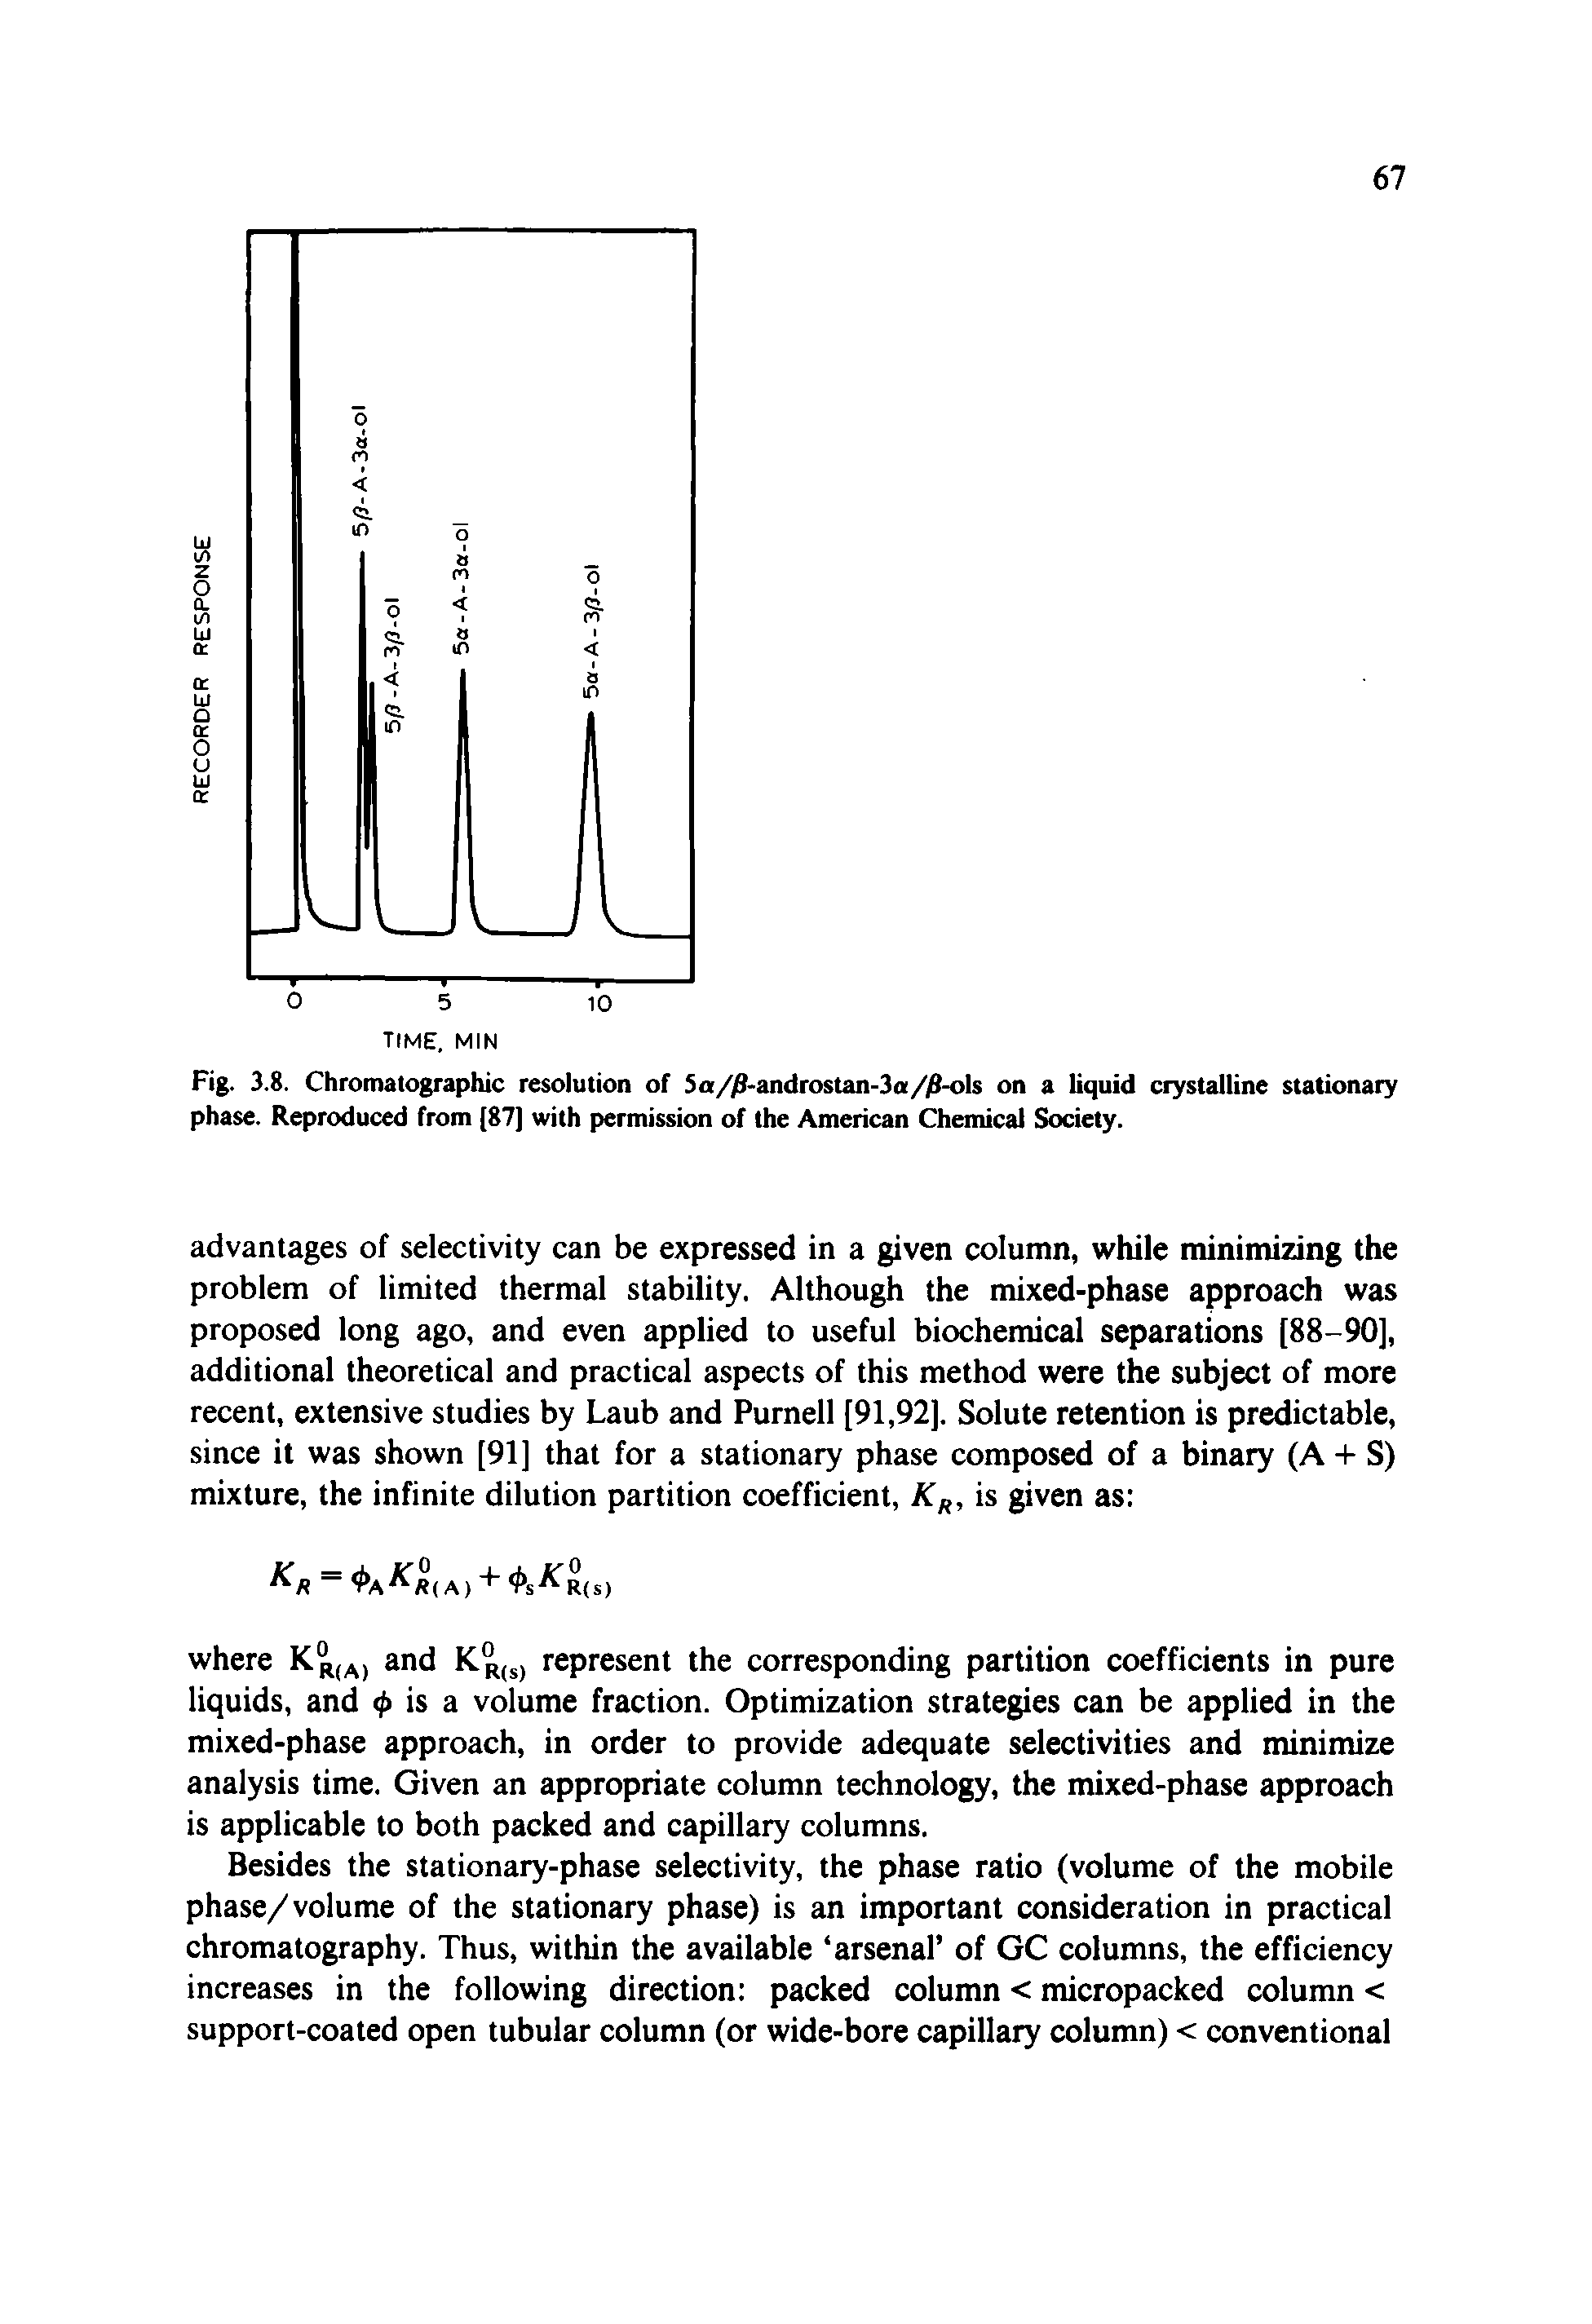 Fig. 3.8. Chromatographic resolution of Sa//3-androstan-3a/jS-ols on a liquid crystalline stationary phase. Reproduced from [87] with permission of the American Chemical Society.